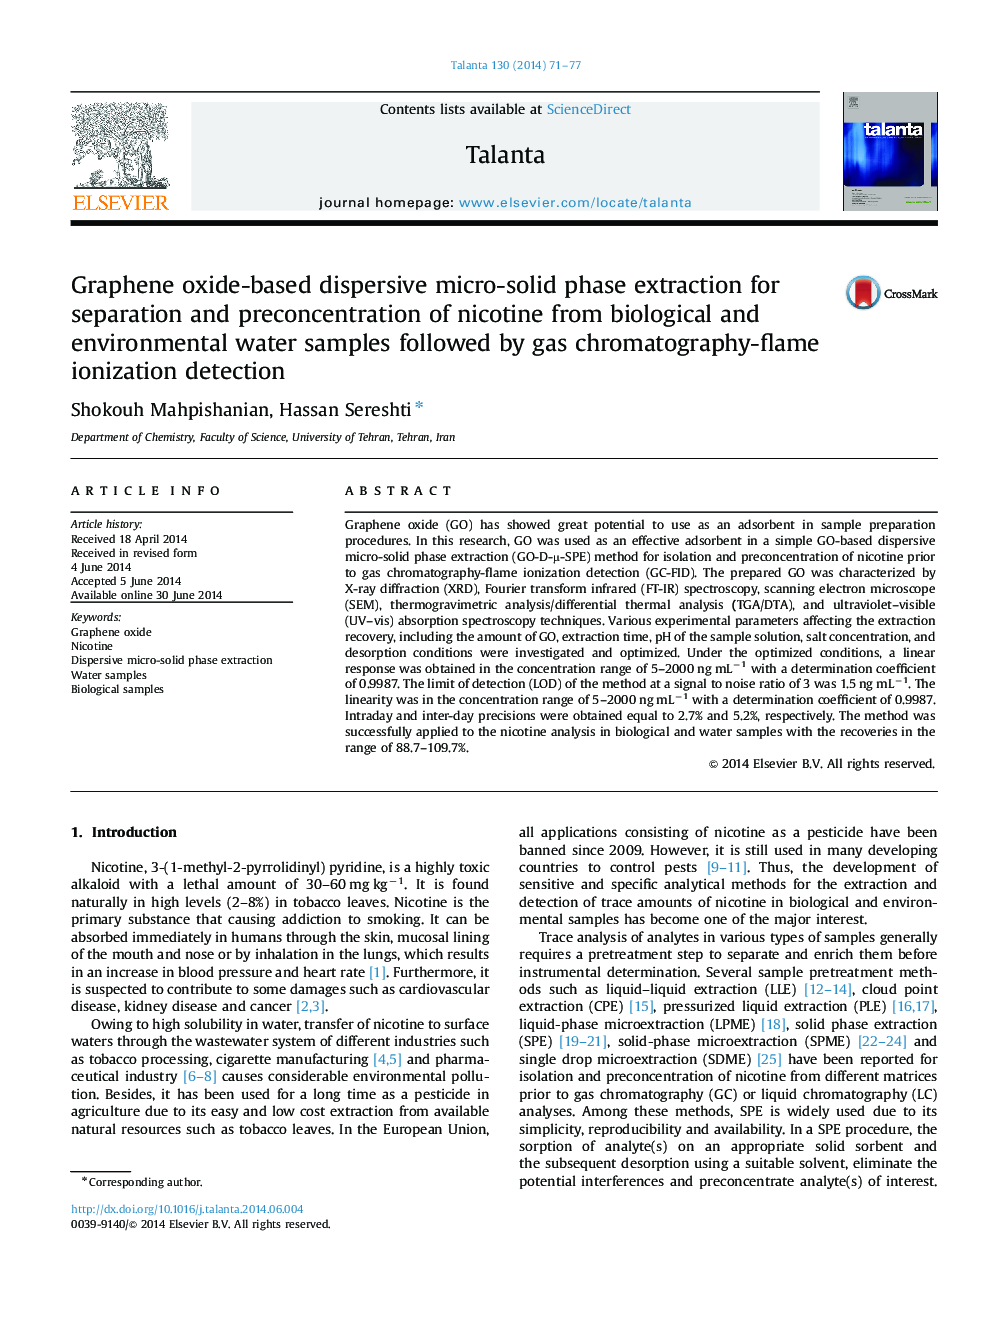 Graphene oxide-based dispersive micro-solid phase extraction for separation and preconcentration of nicotine from biological and environmental water samples followed by gas chromatography-flame ionization detection